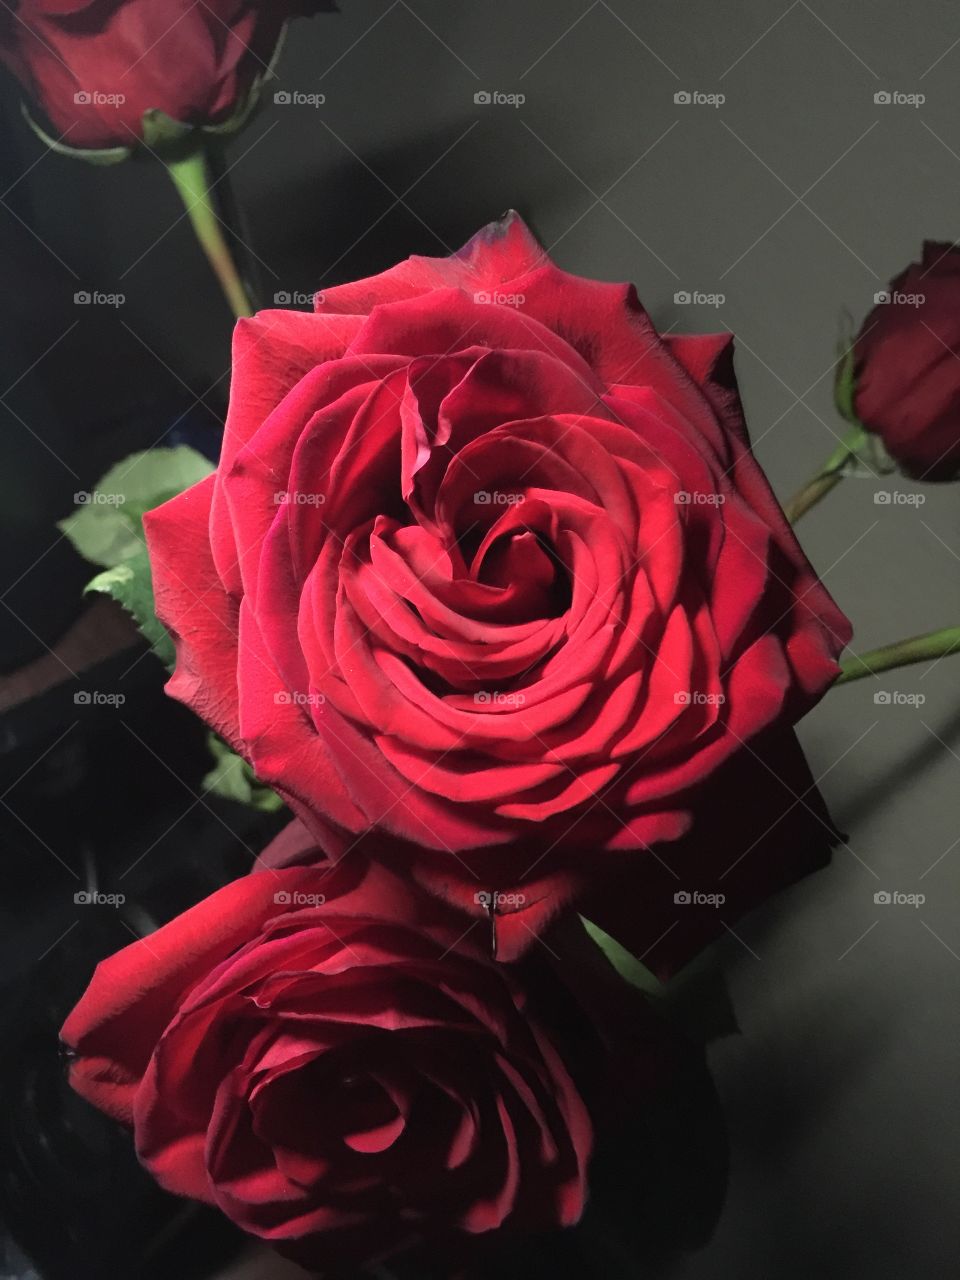 An old red rose is accented with light from above and casts its shadow onto the darkened background.